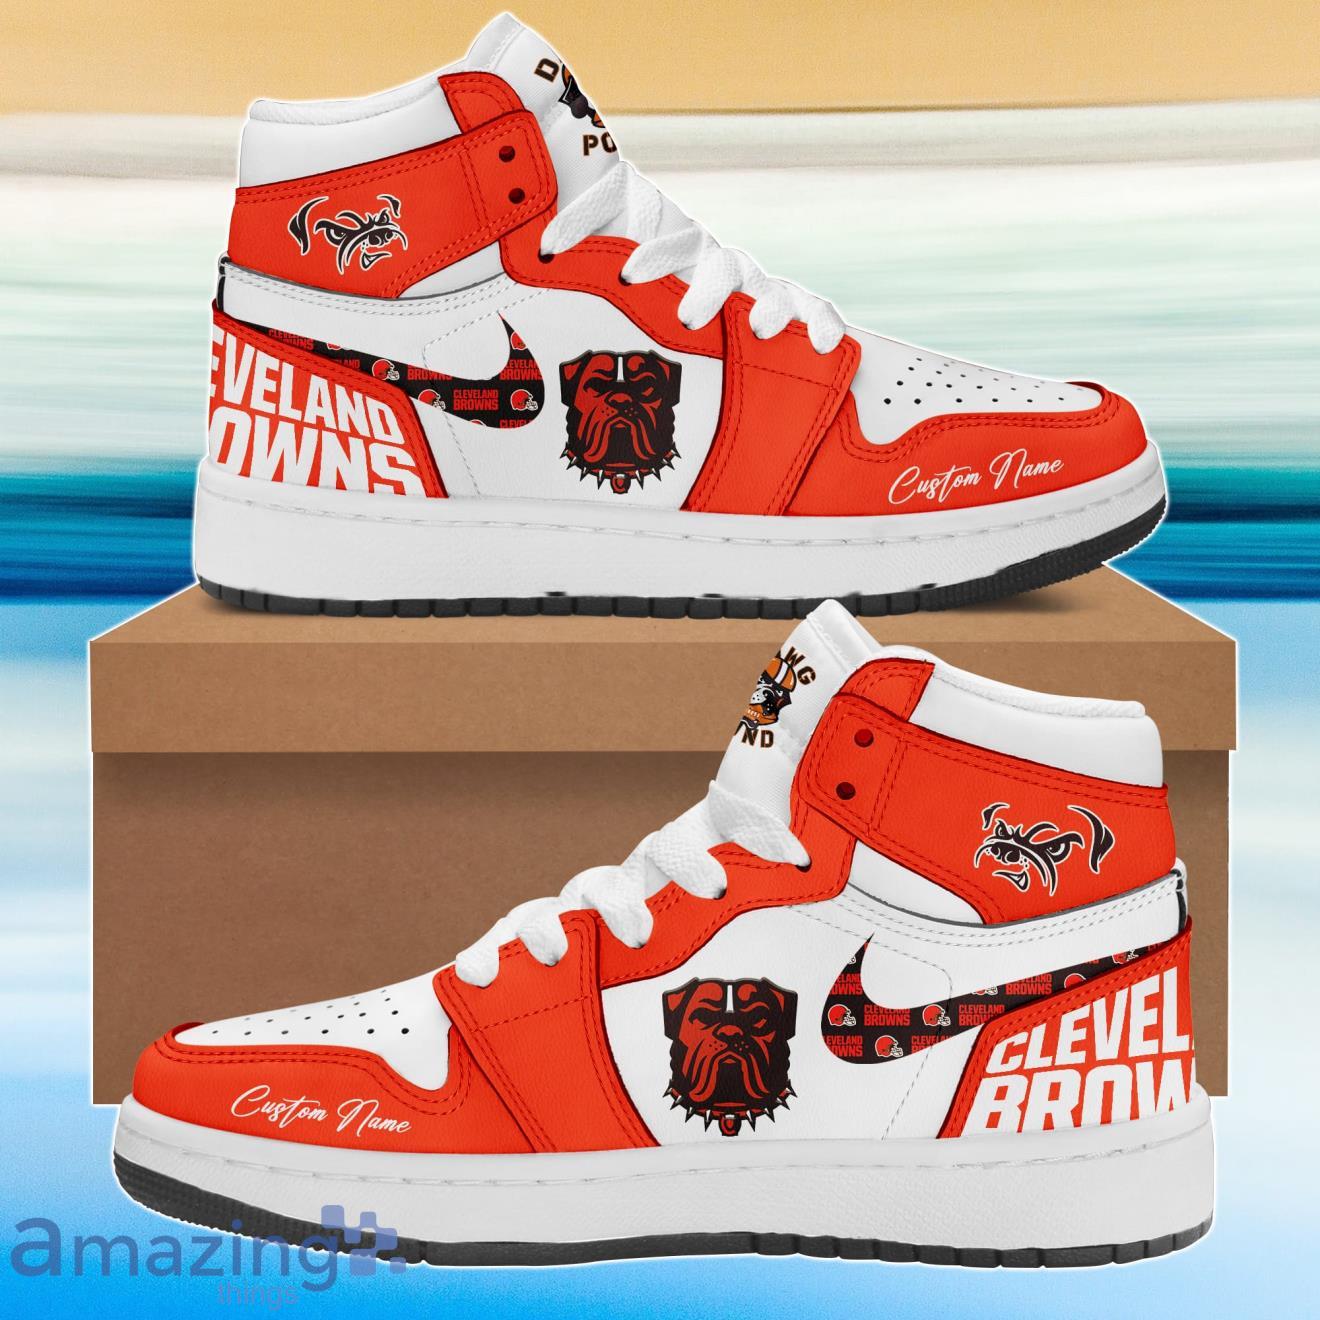 Cleverland Browns Special Edition Shoes Air Jordan Hightop Custom Name